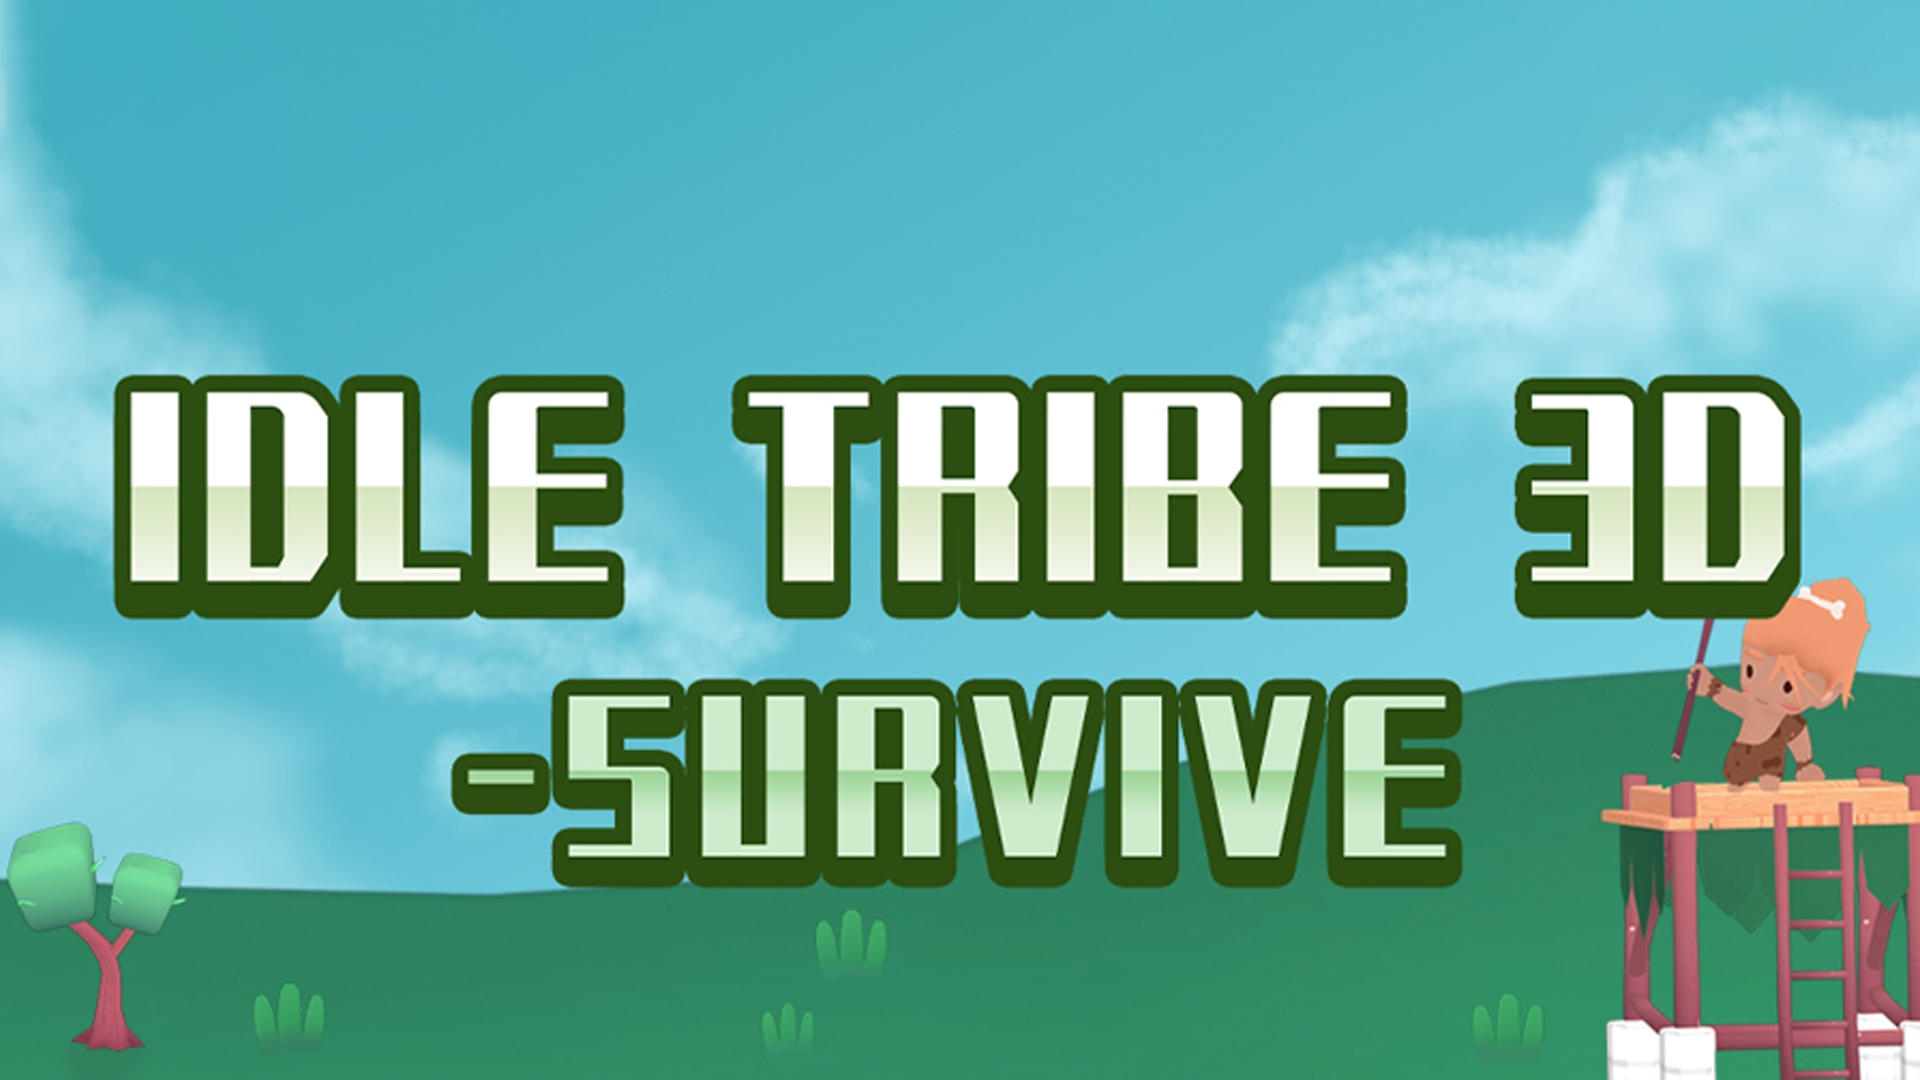 Banner of Idle Tribe 3D -Mabuhay 1.0.9